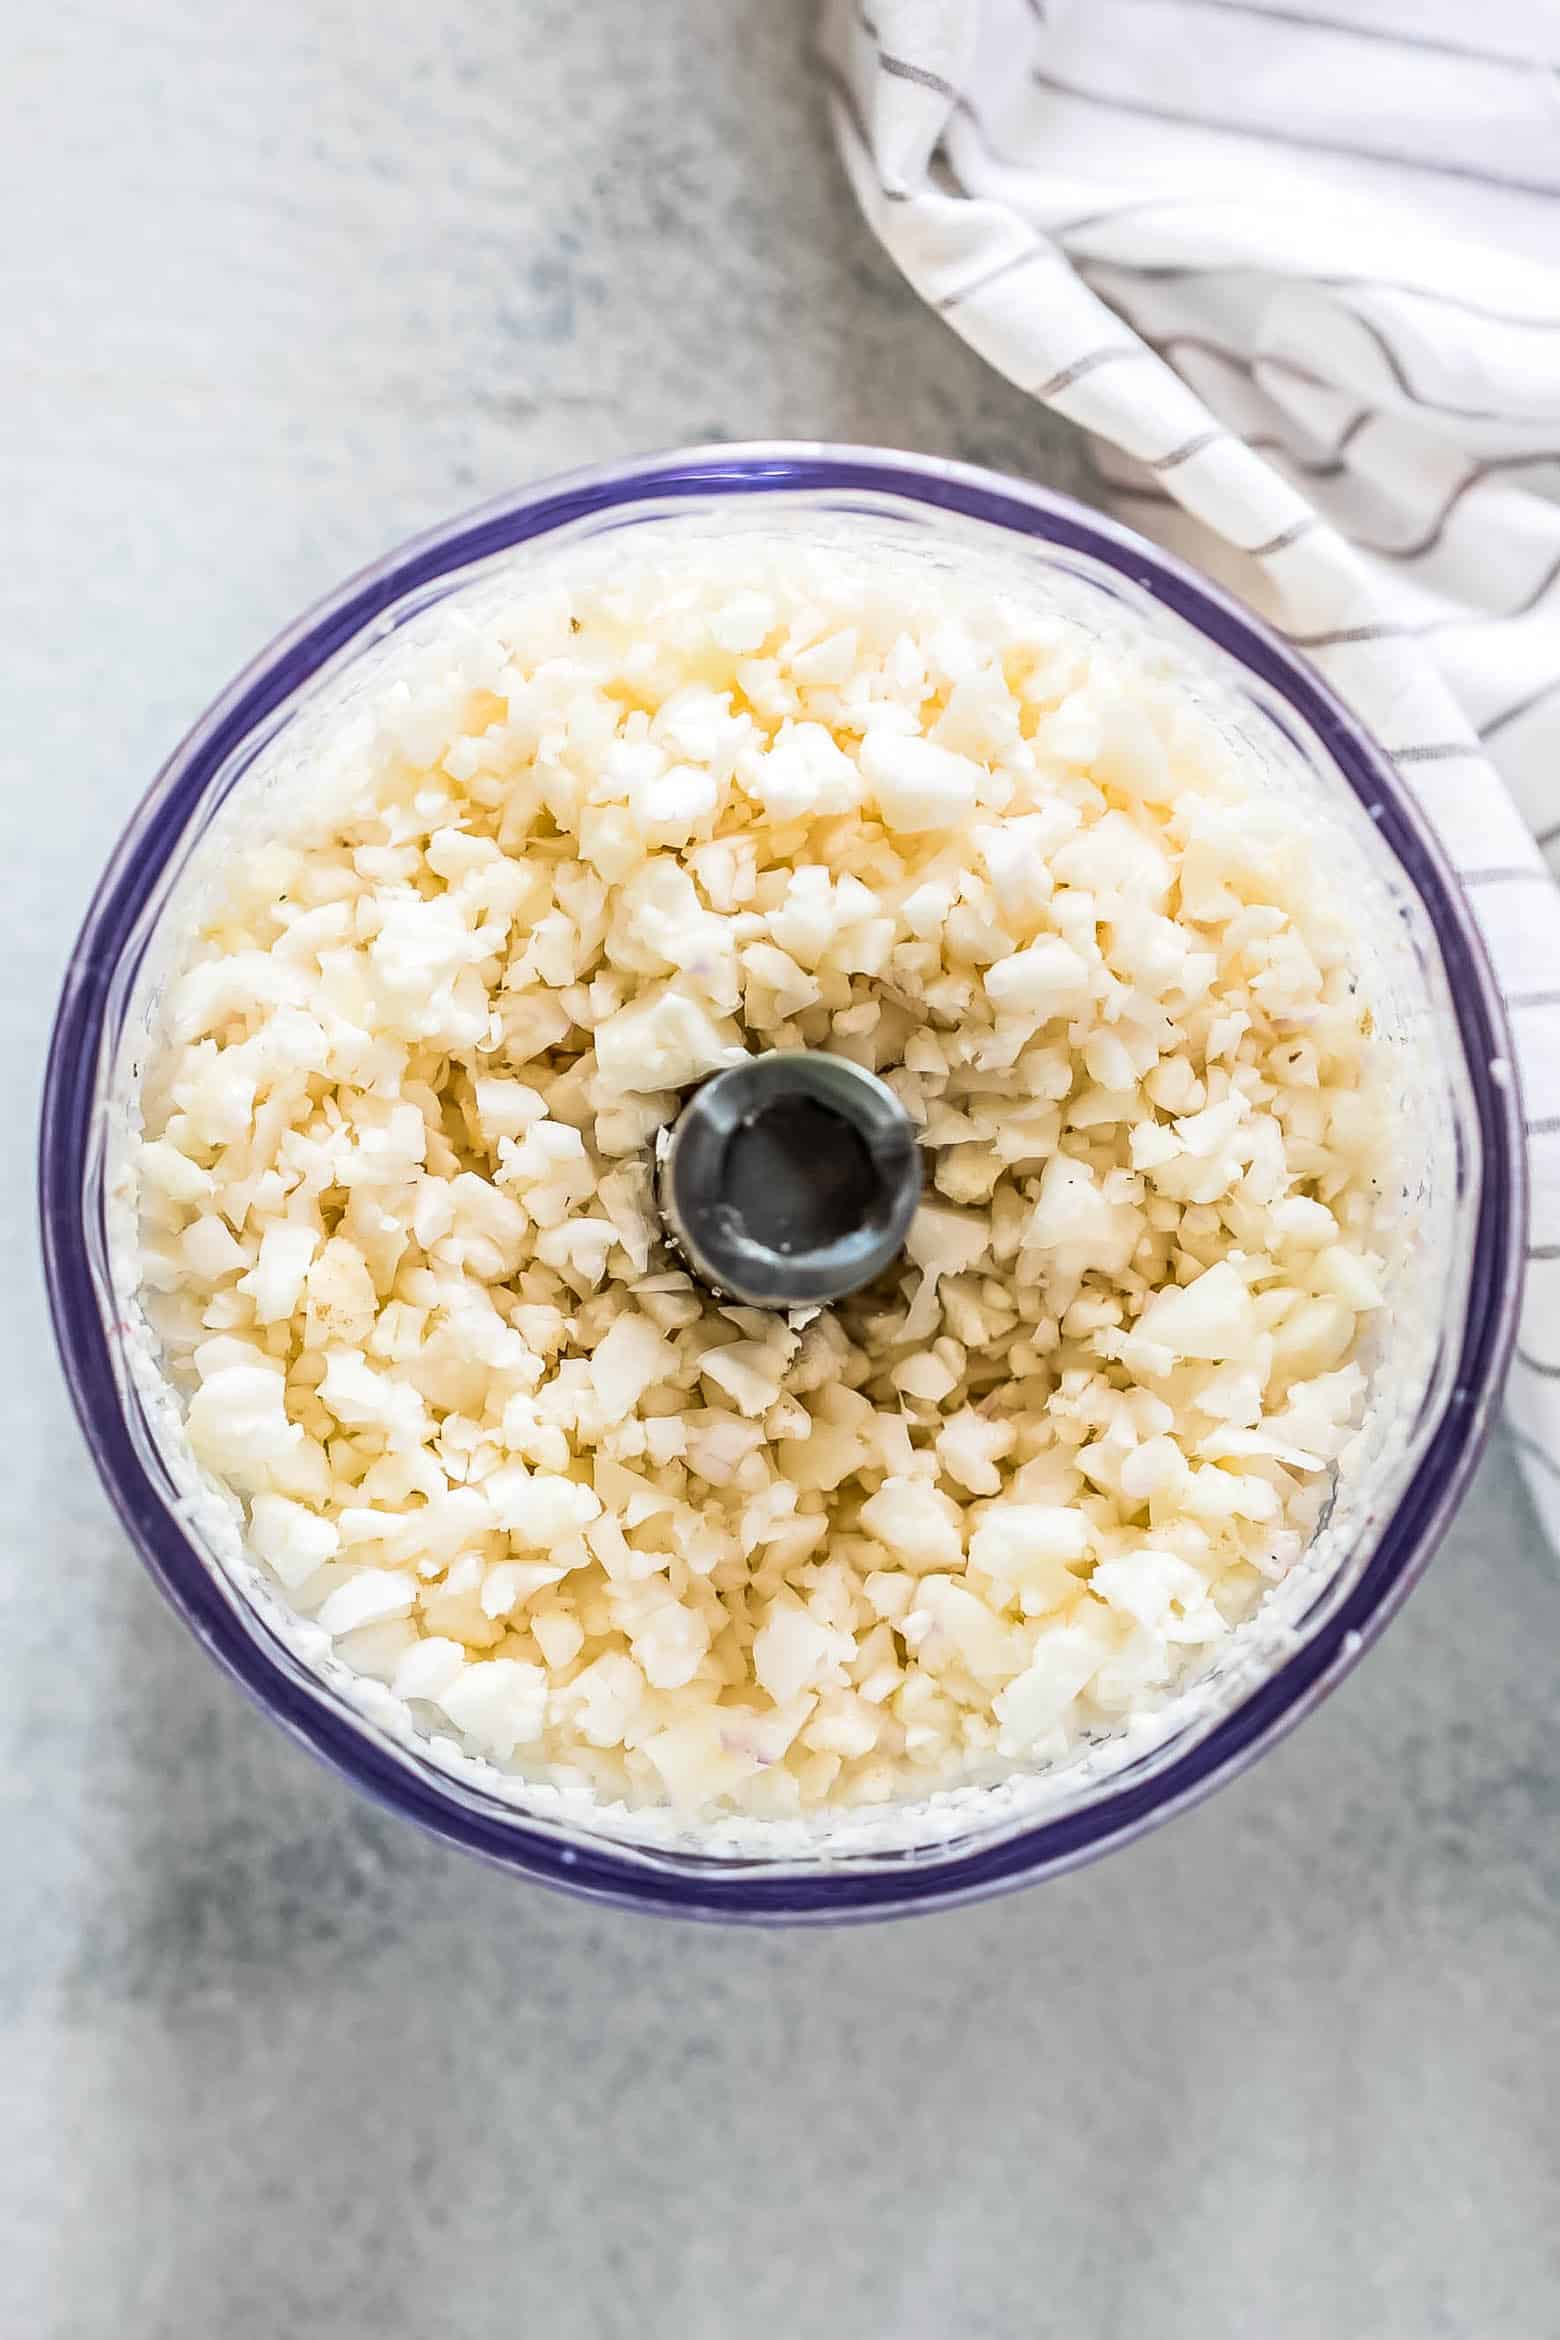 Low Carb Mexican Cauliflower Rice is a healthy, paleo friendly, keto friendly, vegan side dish recipe that is bursting with mexican flavours and ready in 30 minutes!